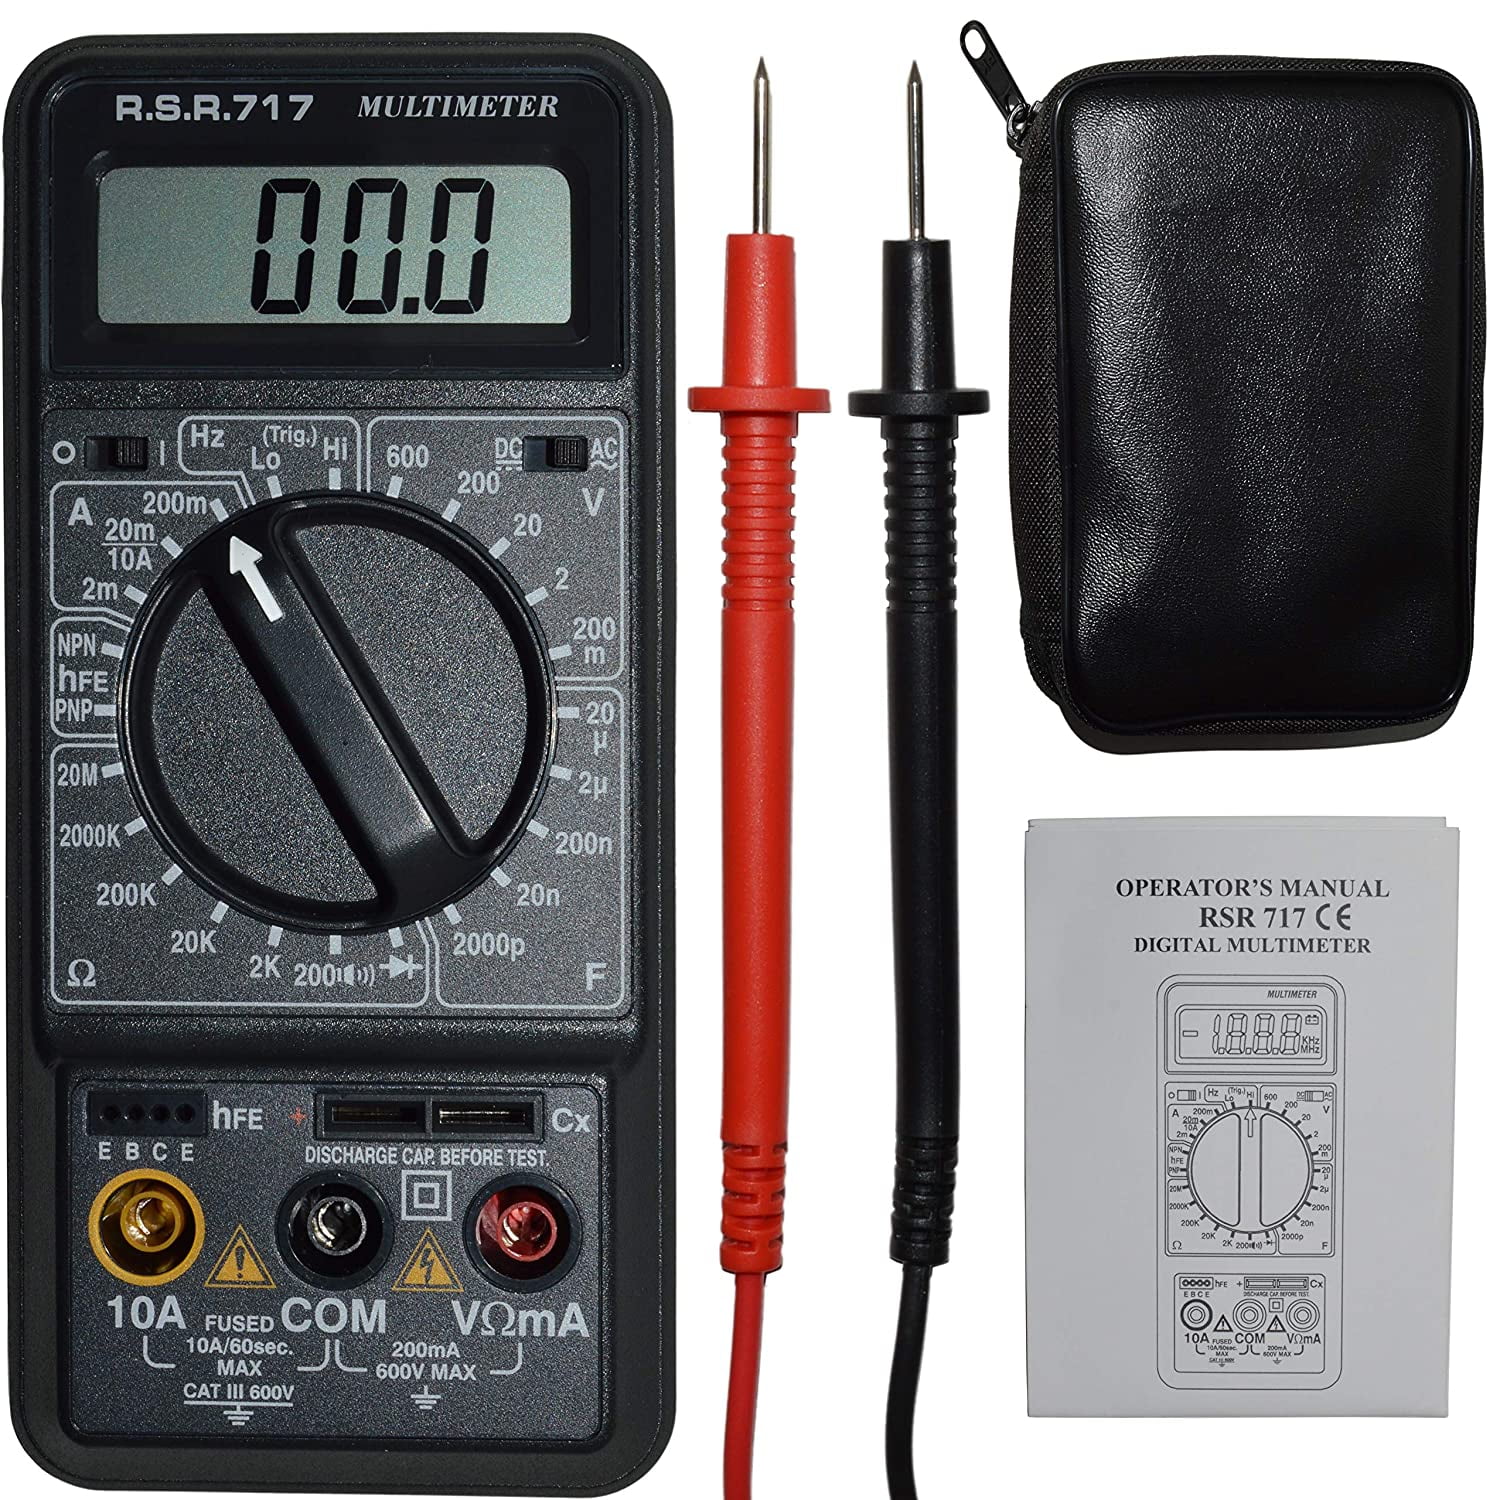 Victor 9807A Digital Multimeter 20000 Counts True RMS AC Capacitance  Frequency Diode Triode hFE Tech Meter Tester Electricista